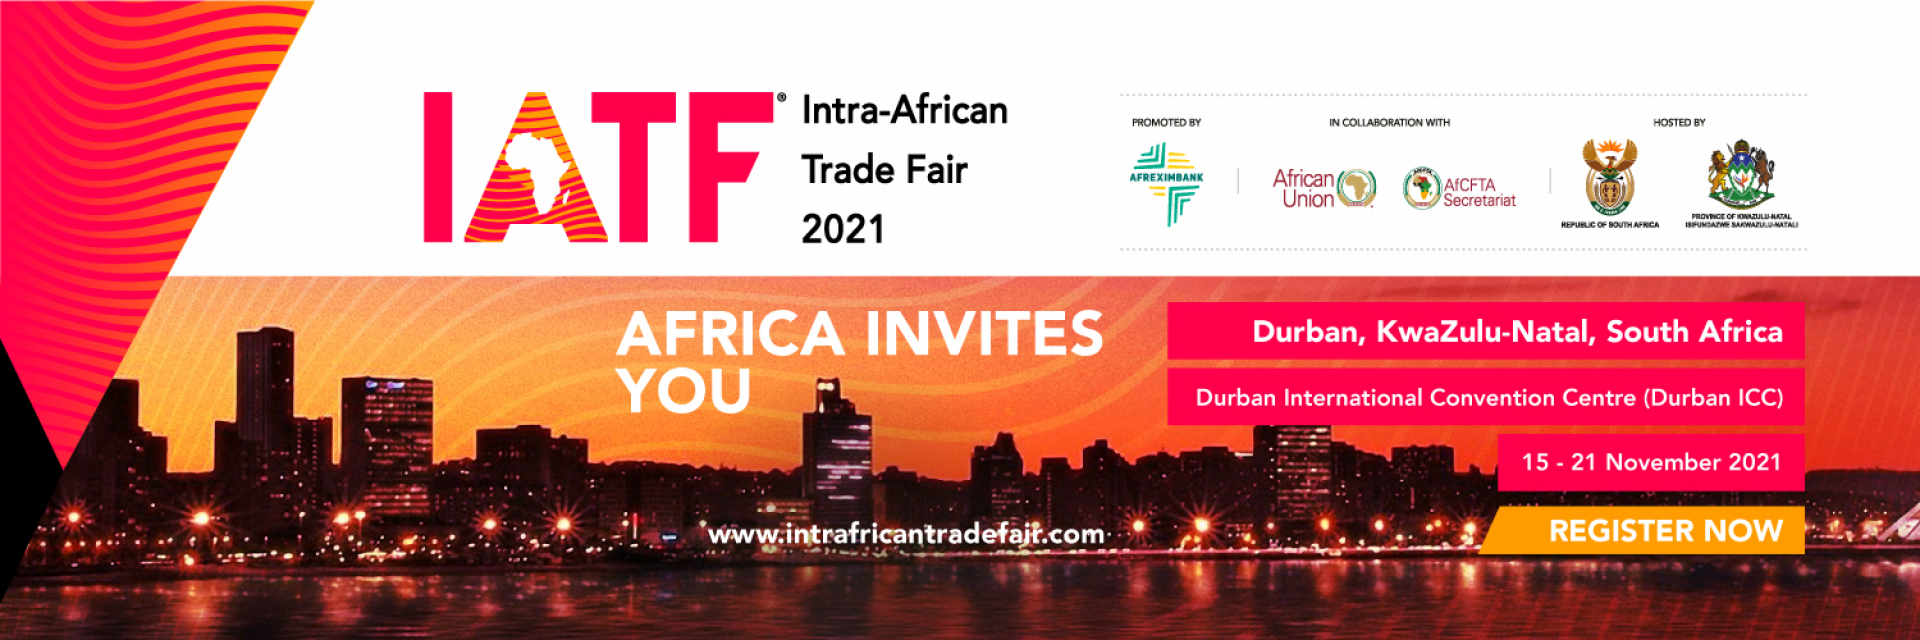 IntraAfrican Trade Fair 2021 United Nations Economic Commission for